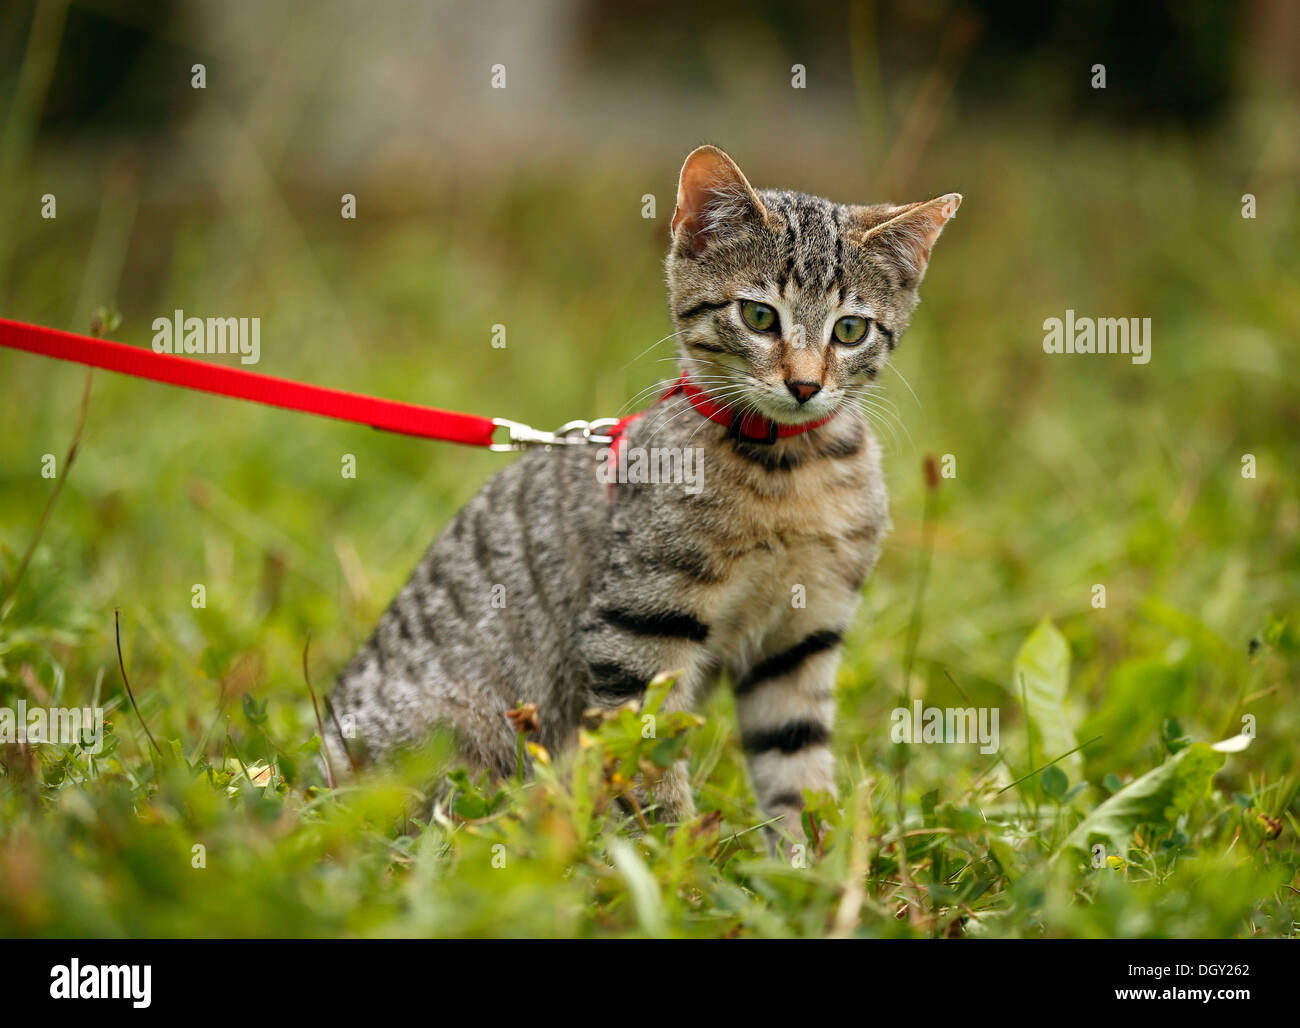 Brown tabby cat, 4 months, sitting on the grass with a leash Stock Photo